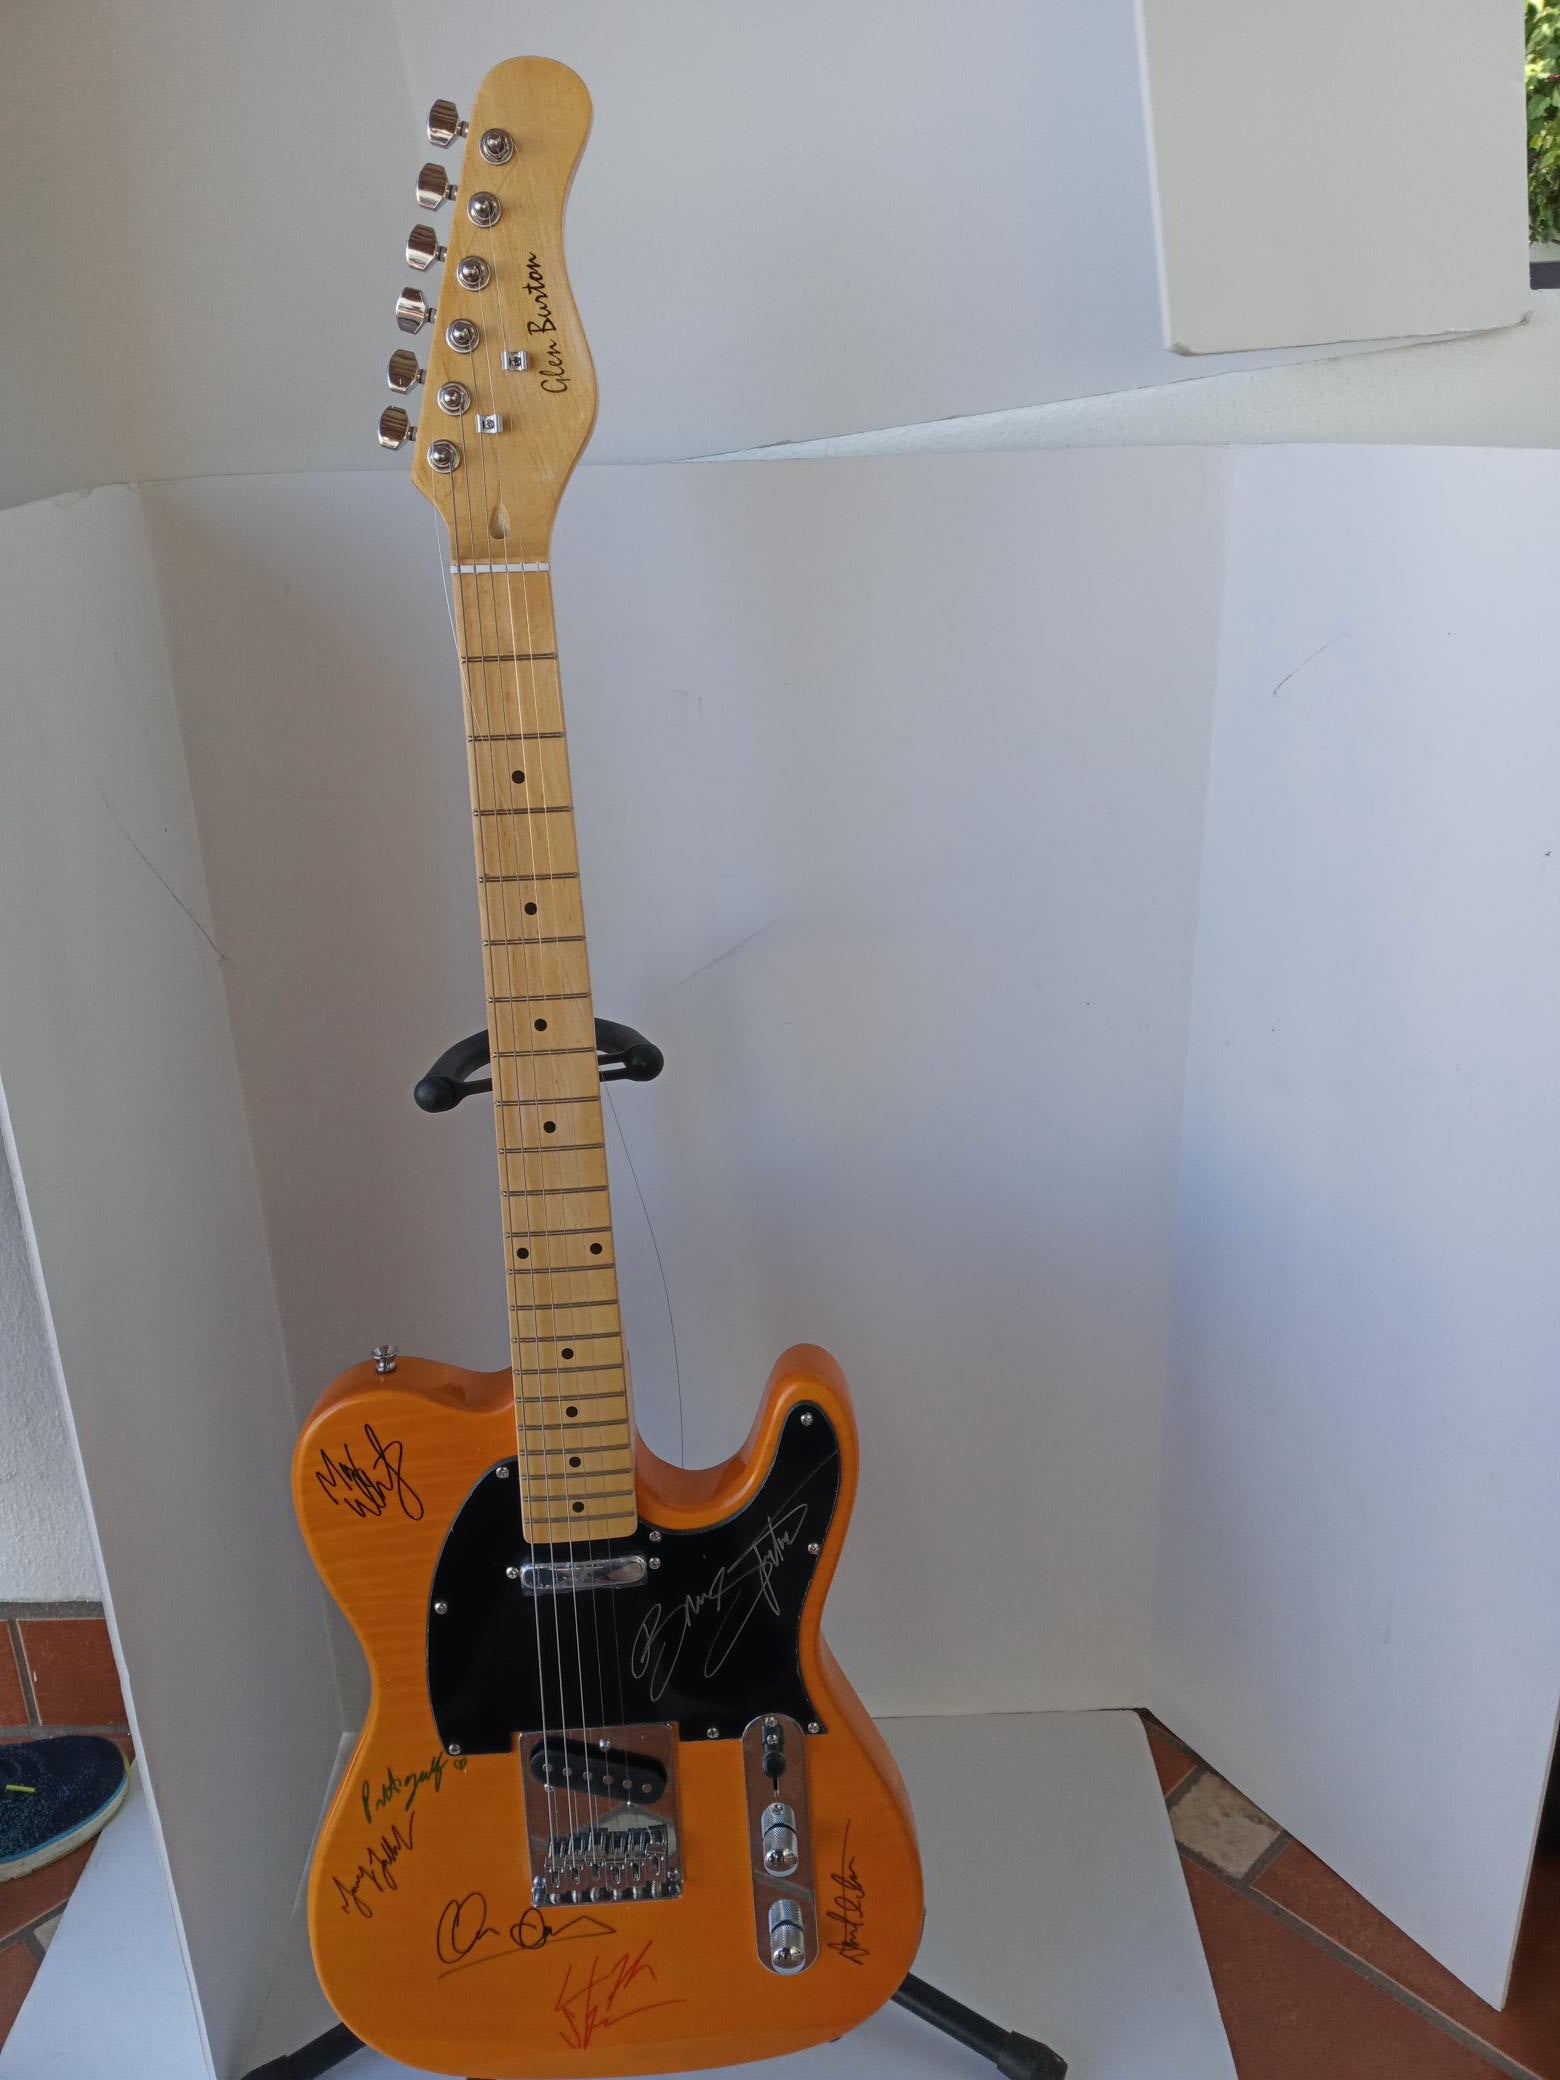 Bruce Springsteen, Clarence Clemons, Max Weinberg, Danny Federici, The E Street Band Telecaster signed guitar with proof